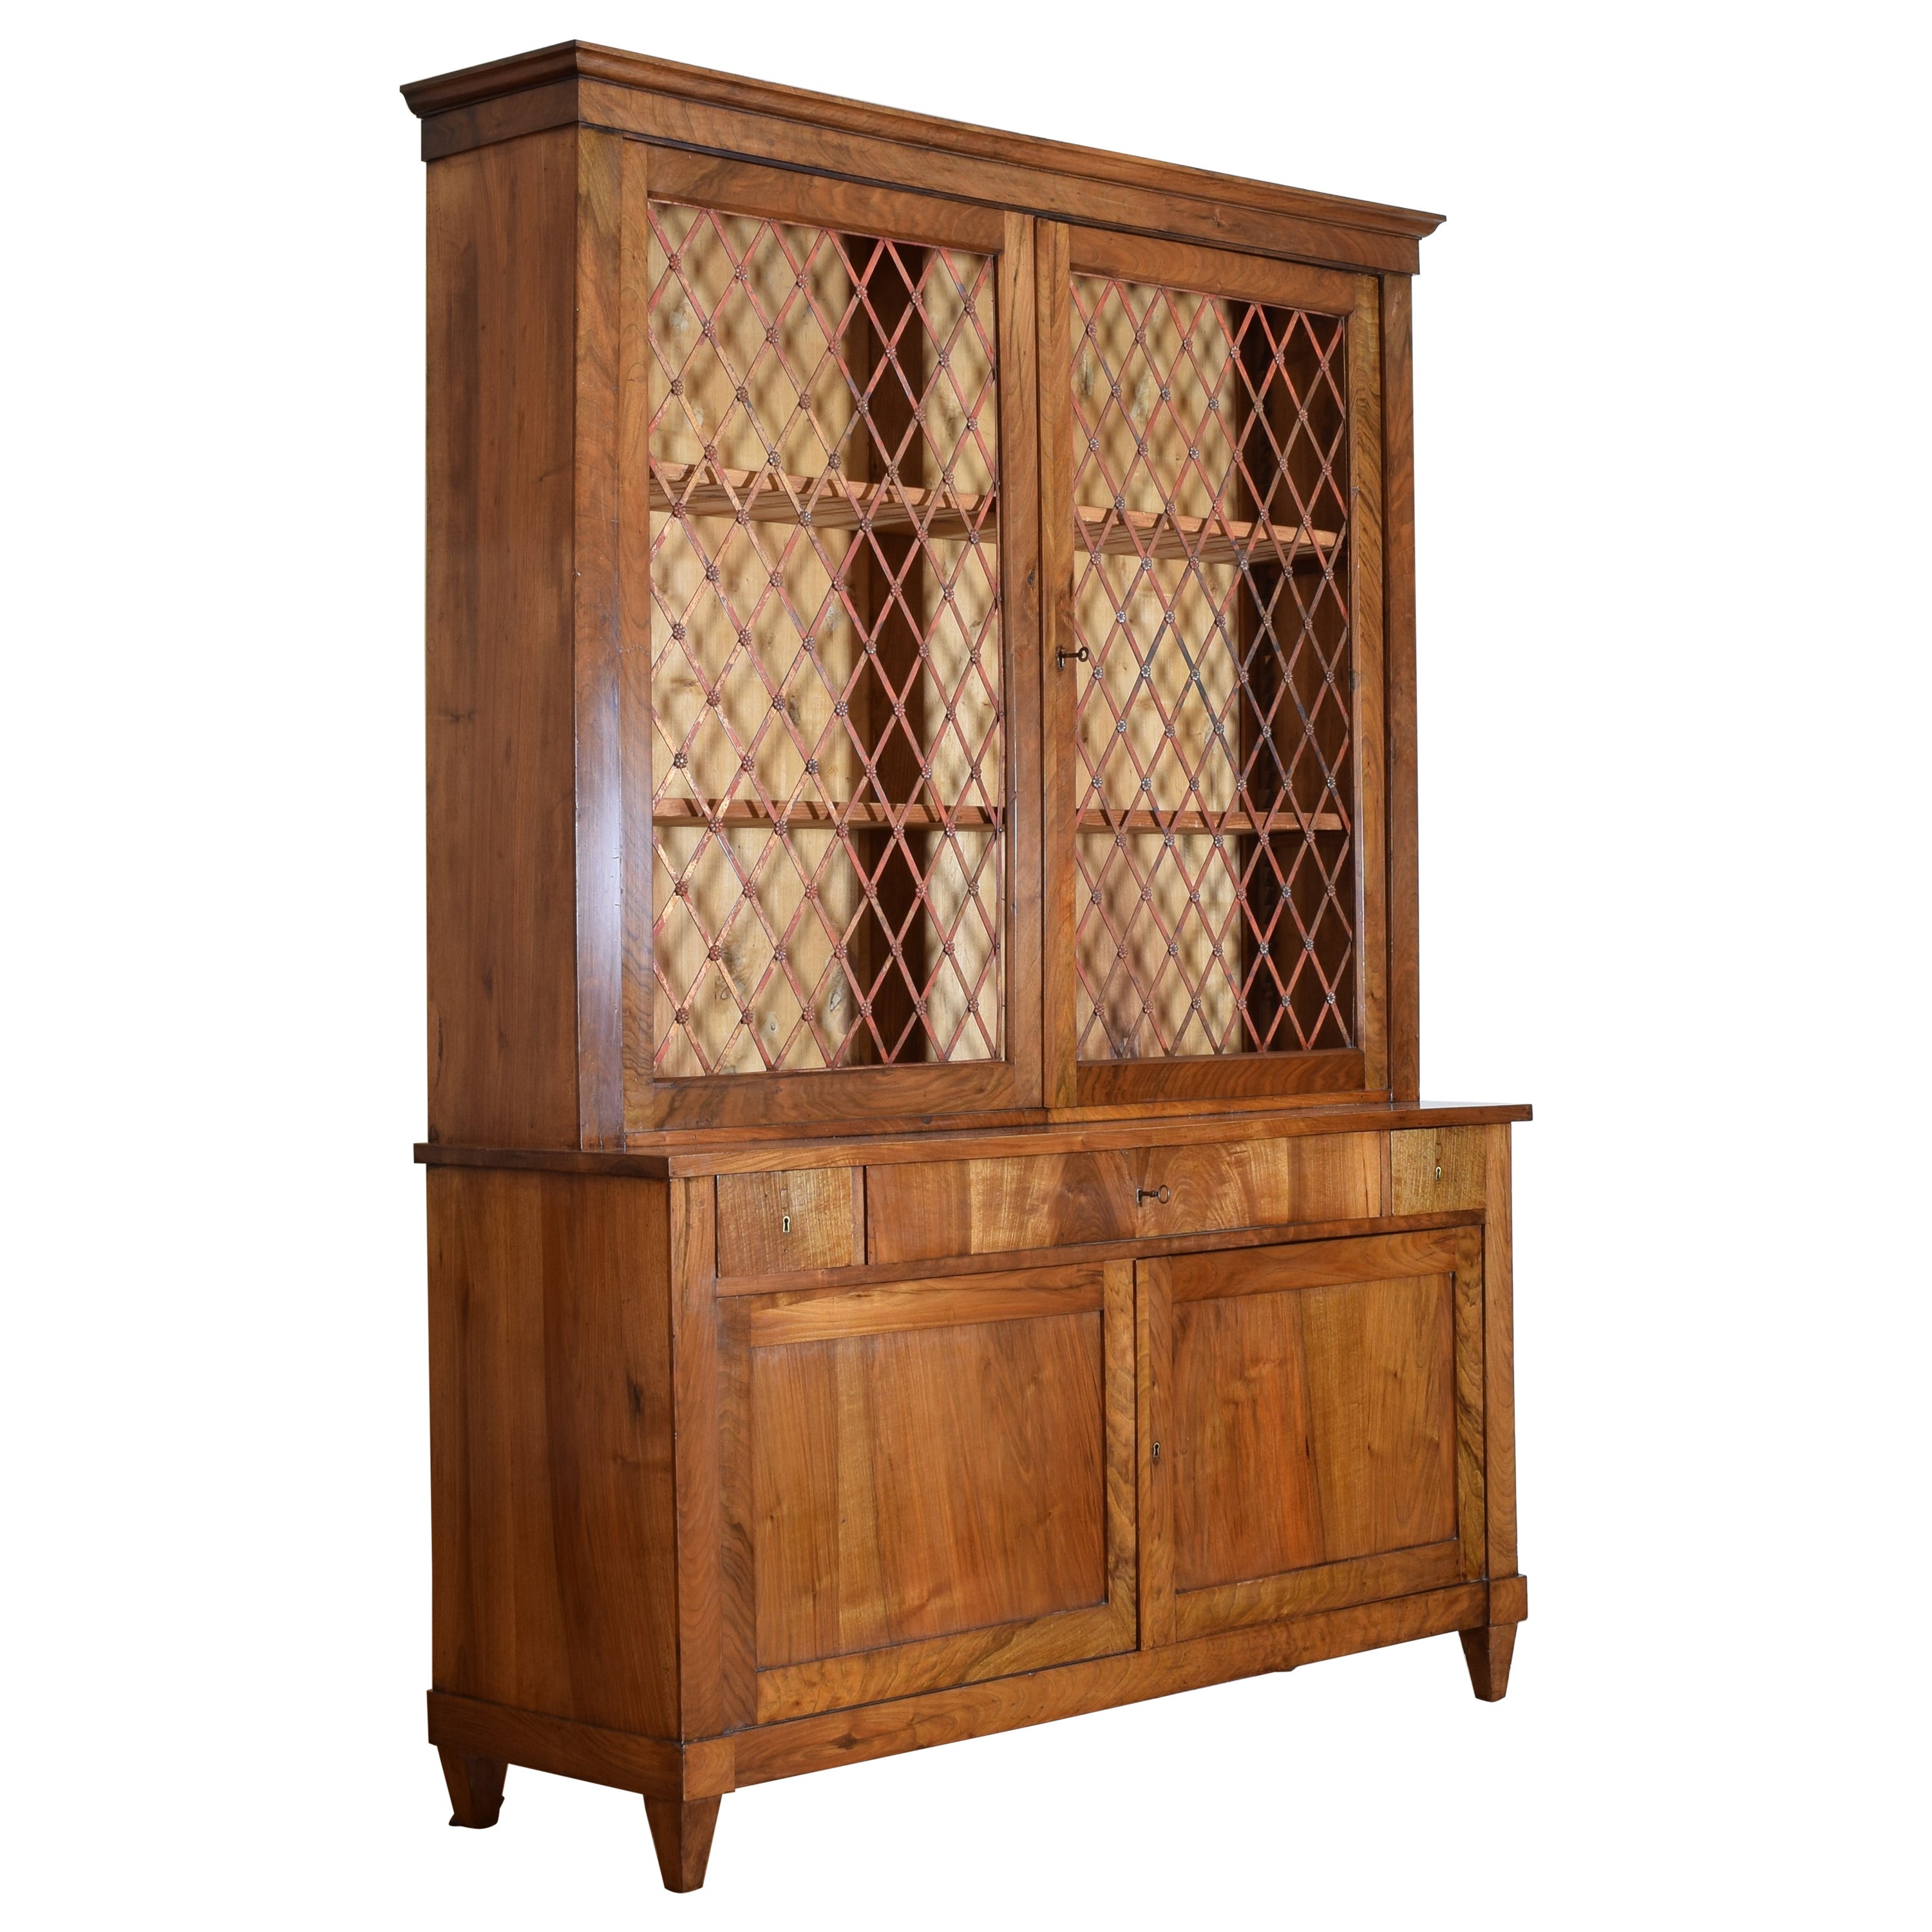 Italian, Tuscany, Neoclassical Period Walnut 2-Piece Bookcase Cabinet 2ndq 19thc For Sale